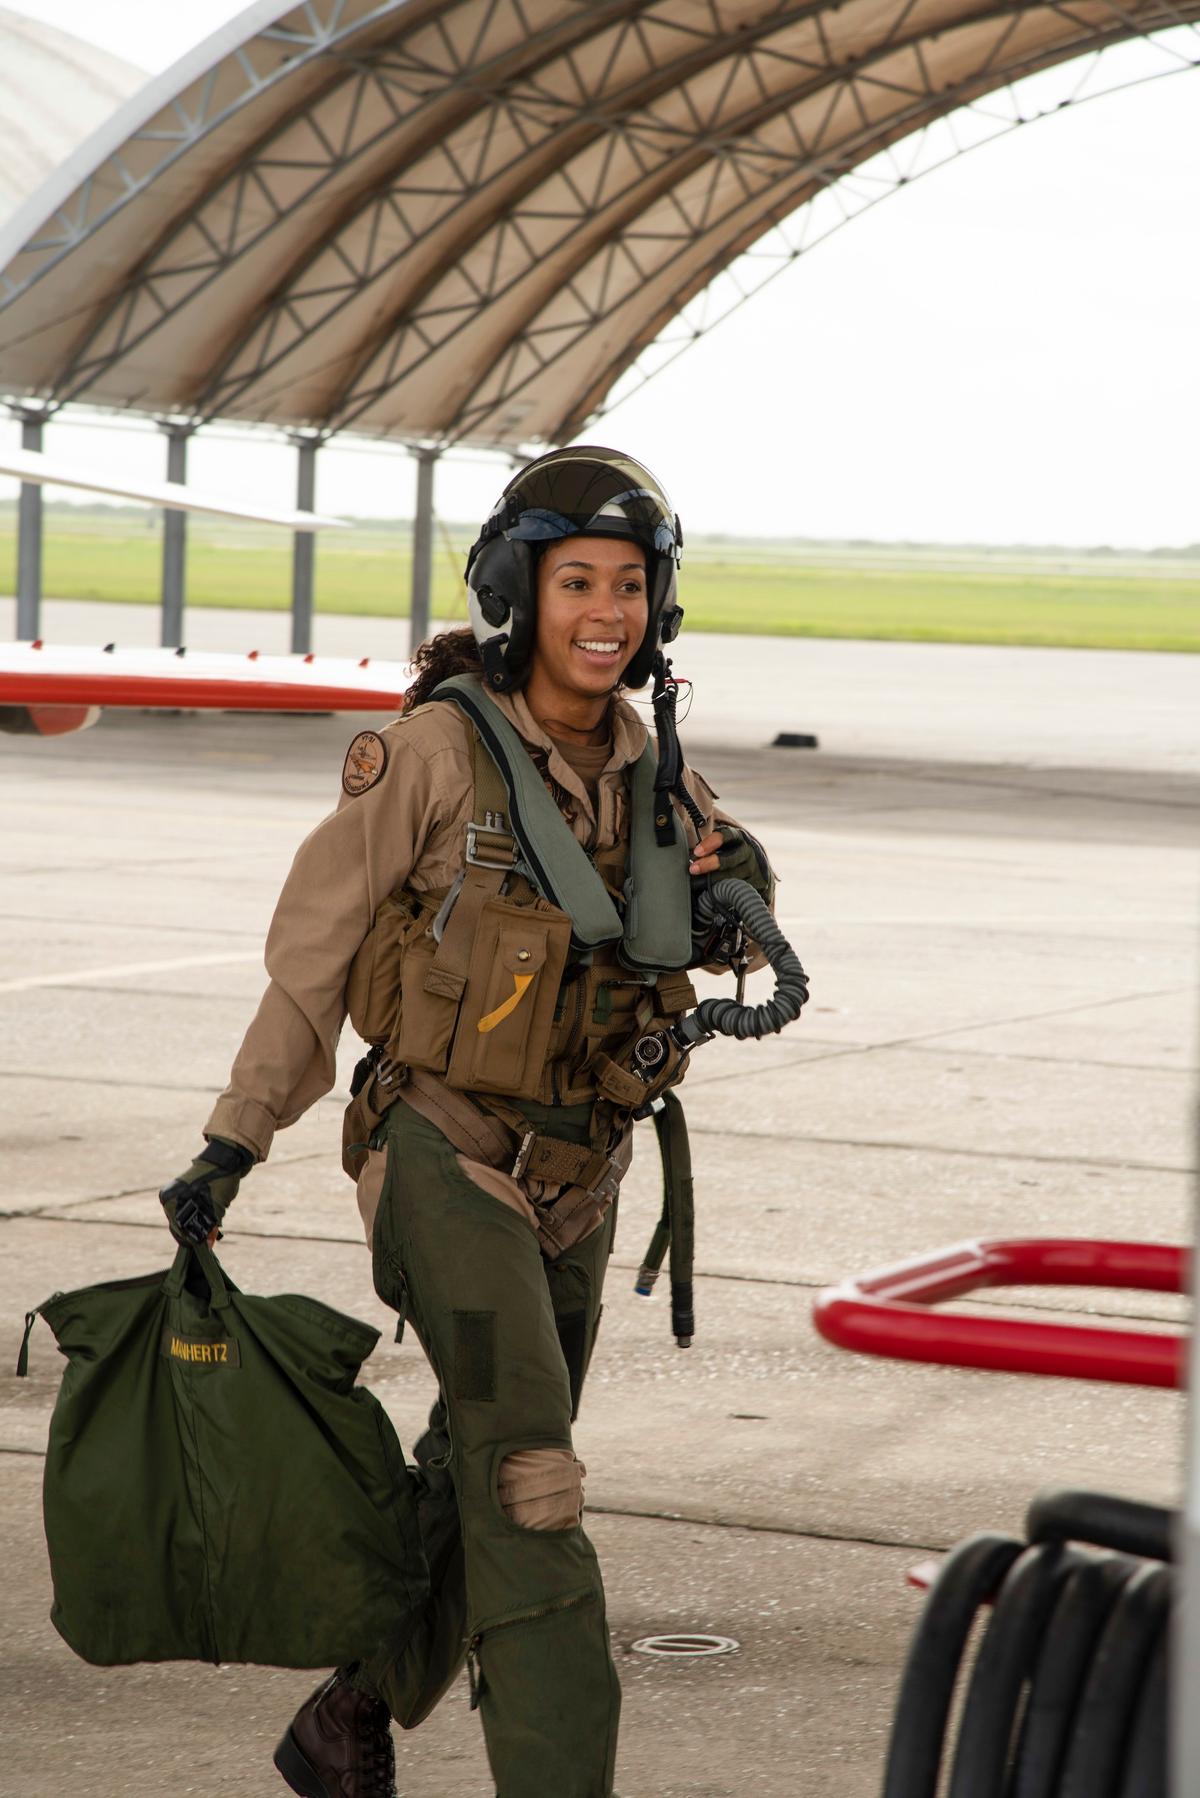 Student Naval aviator Lt. j.g. Madeline Swegle, assigned to the Redhawks of Training Squadron (VT) 21 at Naval Air Station Kingsville, Texas, exits a T-45C Goshawk training aircraft. (<a href="https://www.navy.mil/view_image.asp?id=317472">Anne Owens</a>/U.S. Navy)